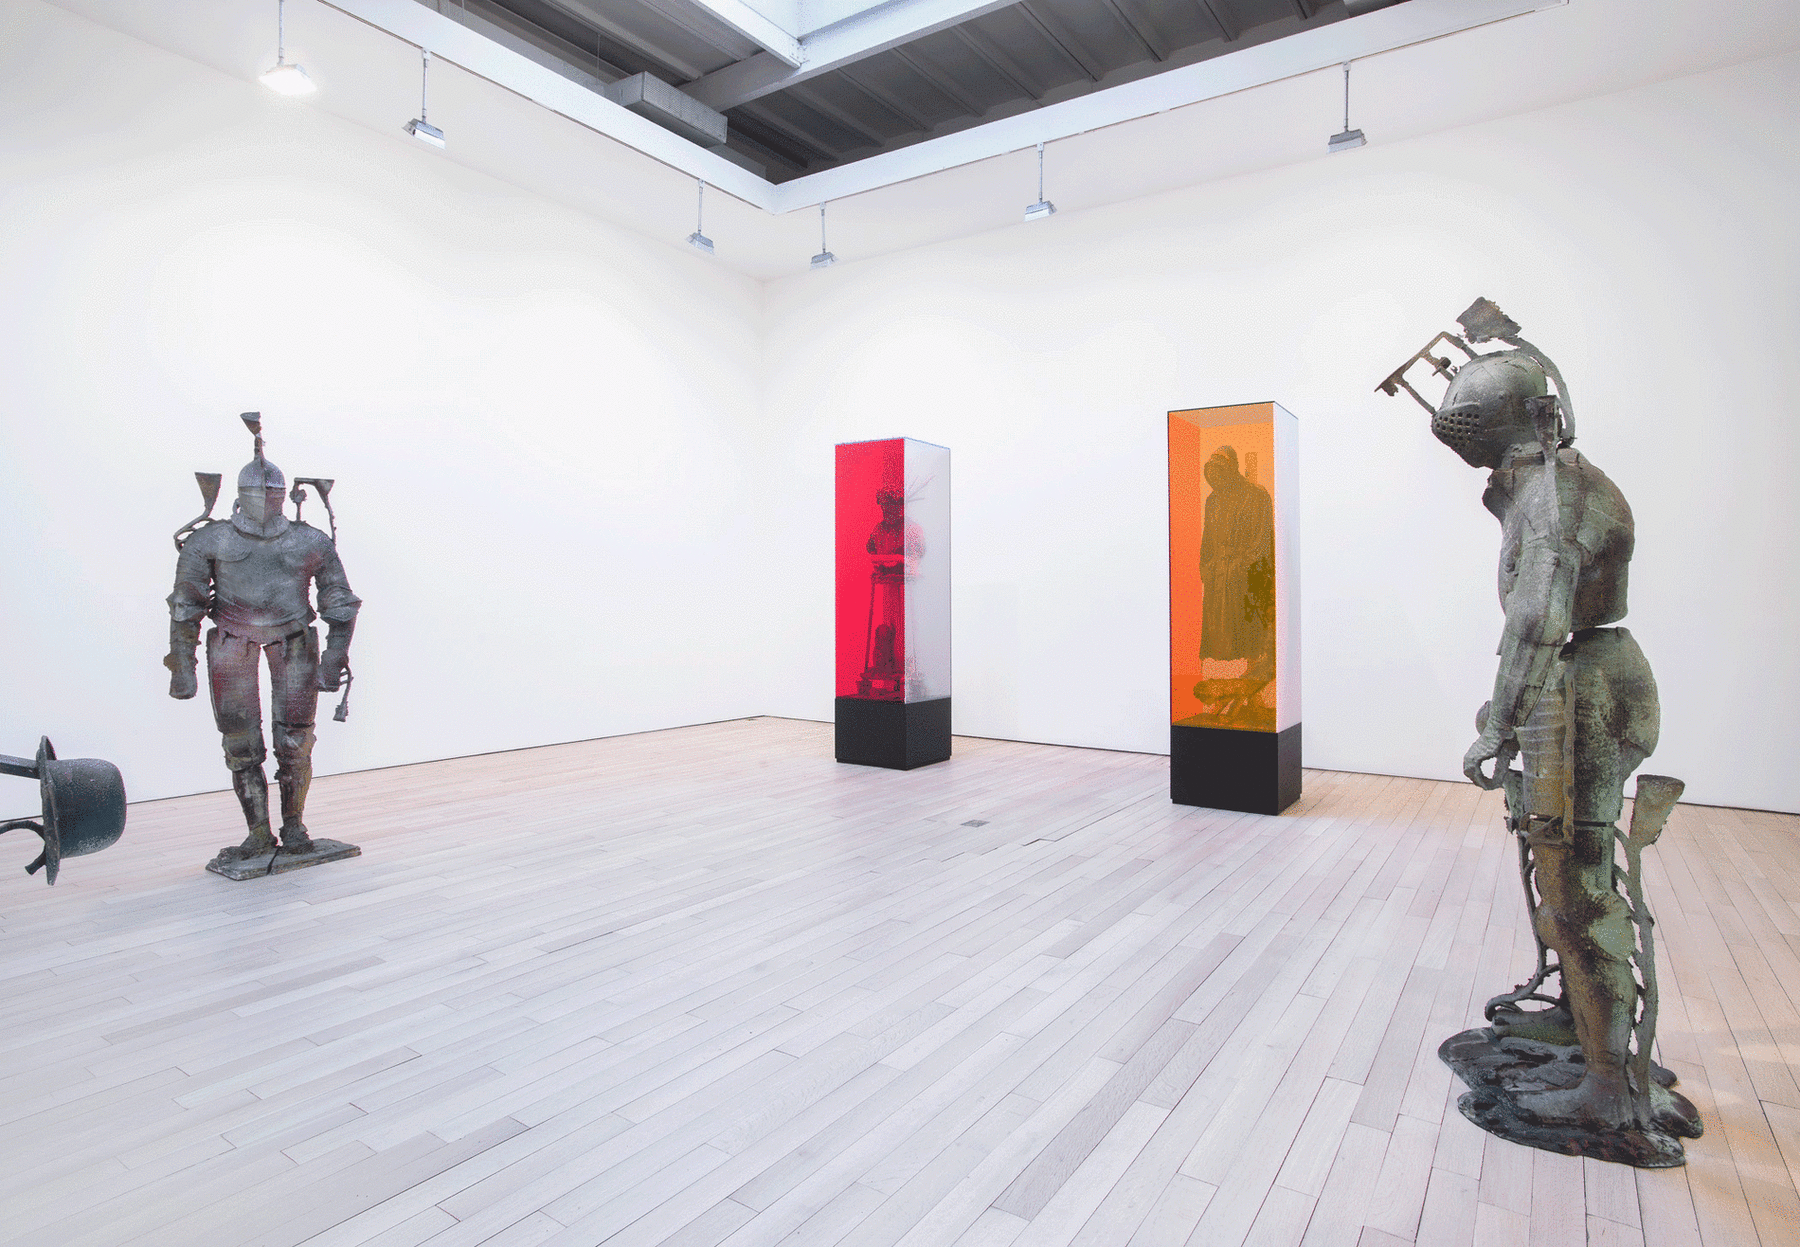 installation view of several artworks